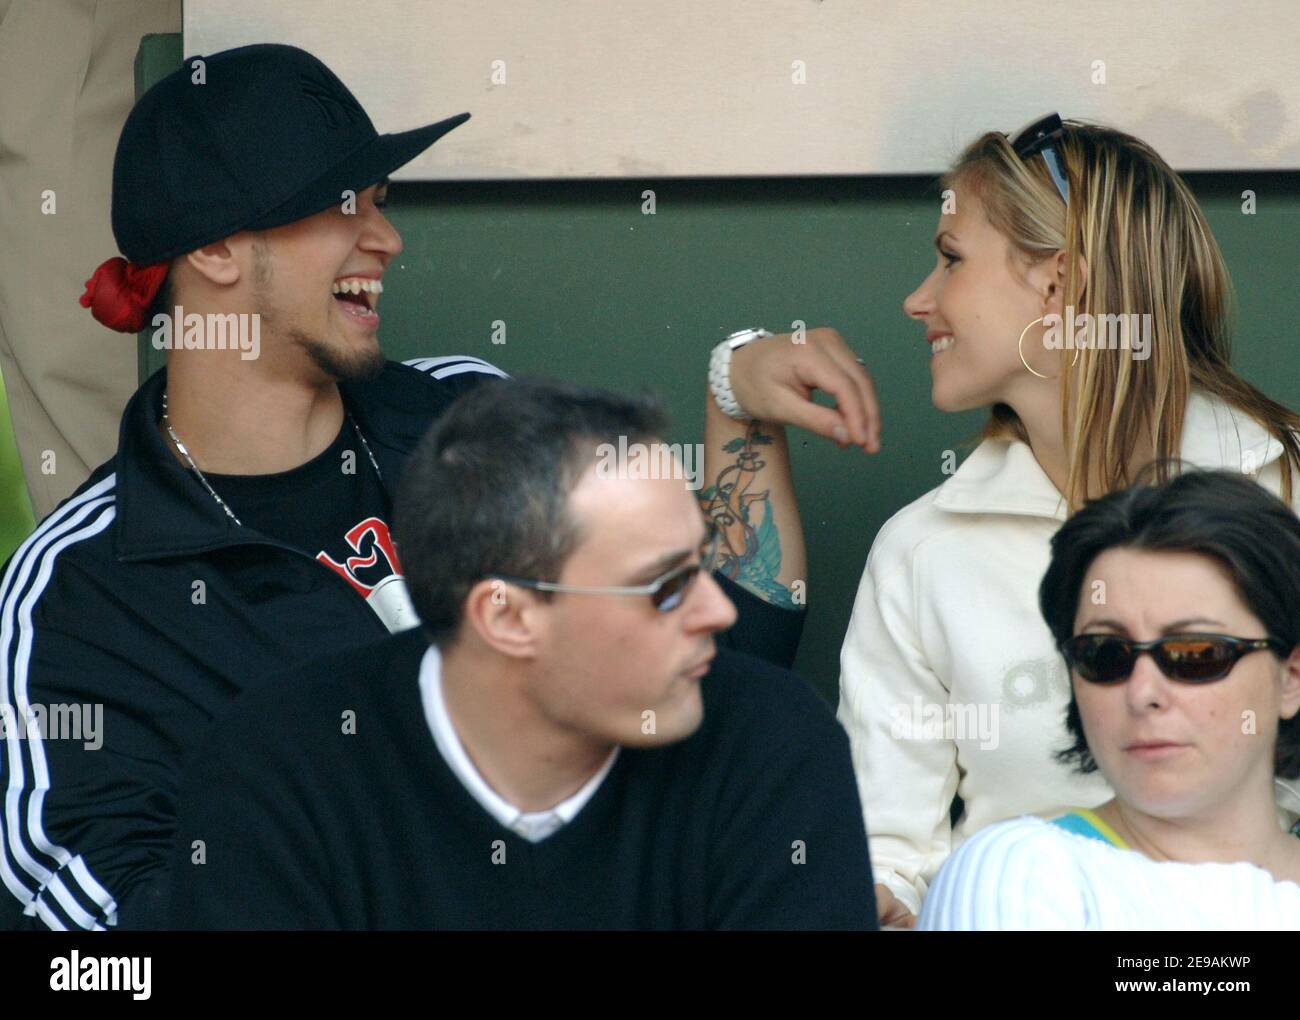 US singer Billy Crawford his girlfriend Marie Courchinoux watch a match in  Adidas stand during the French Tennis Open at Roland-Garros arena, in  Paris, France, on June 3, 2006. Photo by  Gouhier-Nebinger-Zabulon/Cameleon/ABACAPRESS.COM